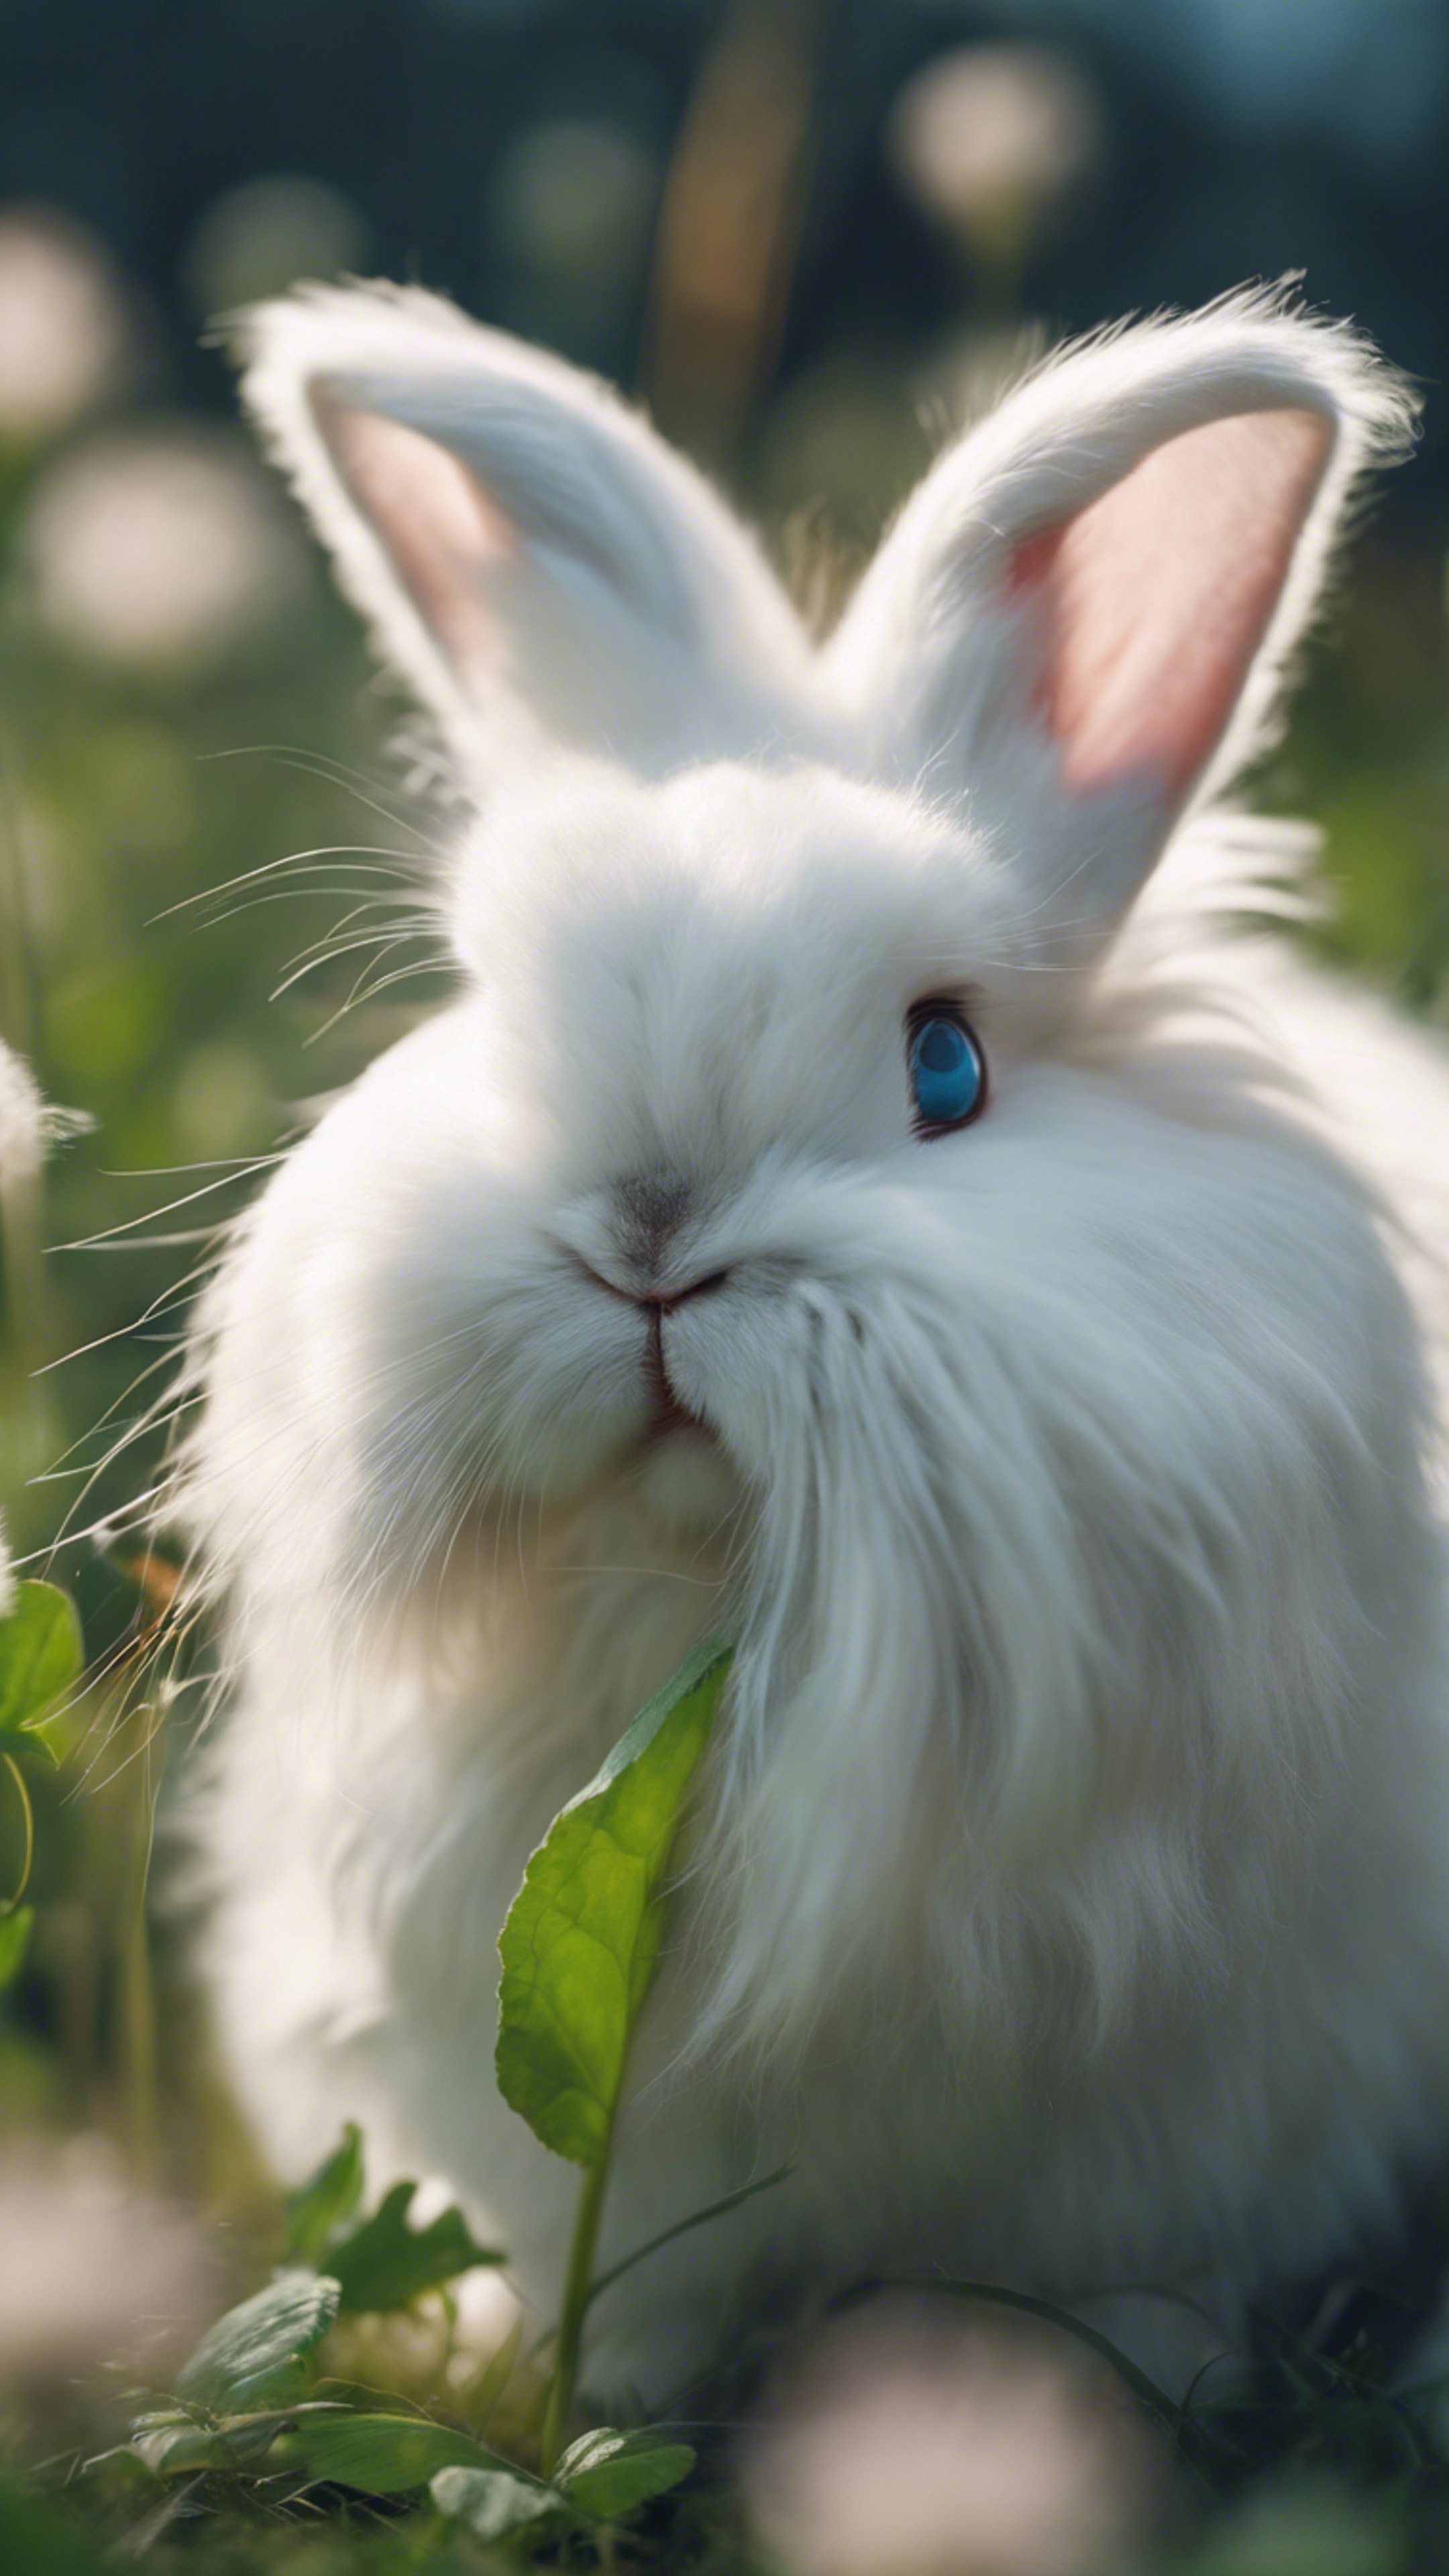 A fluffy angora rabbit with big blue eyes, nestled snugly in a patch of clover. Kertas dinding[a1edfdea4e4b4864b66c]